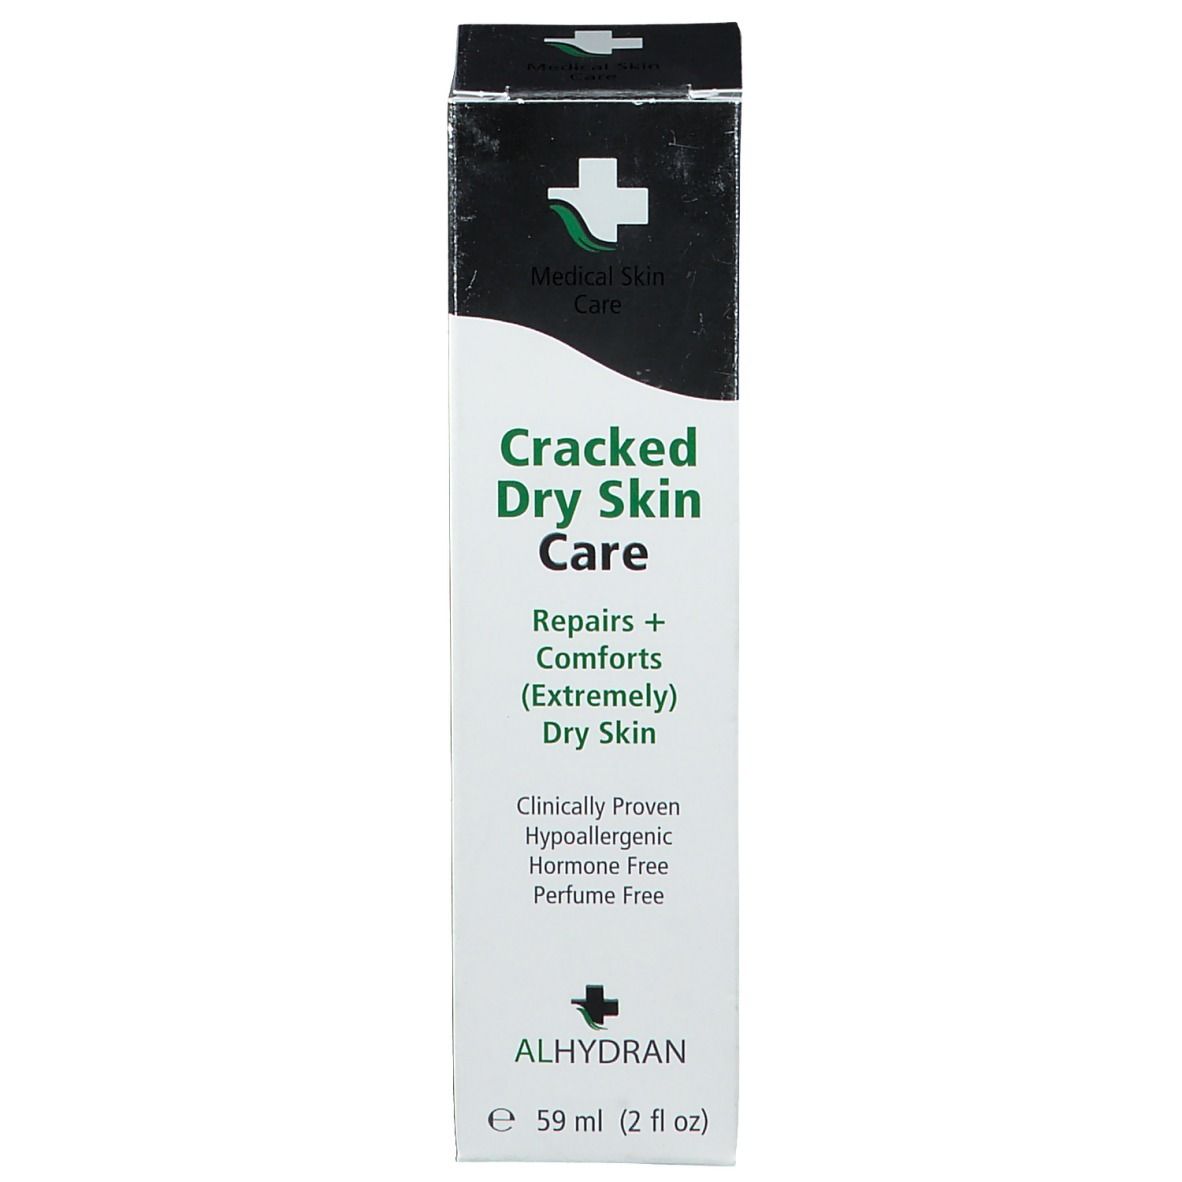 ALHYDRAN Cracked Dry Skin Care